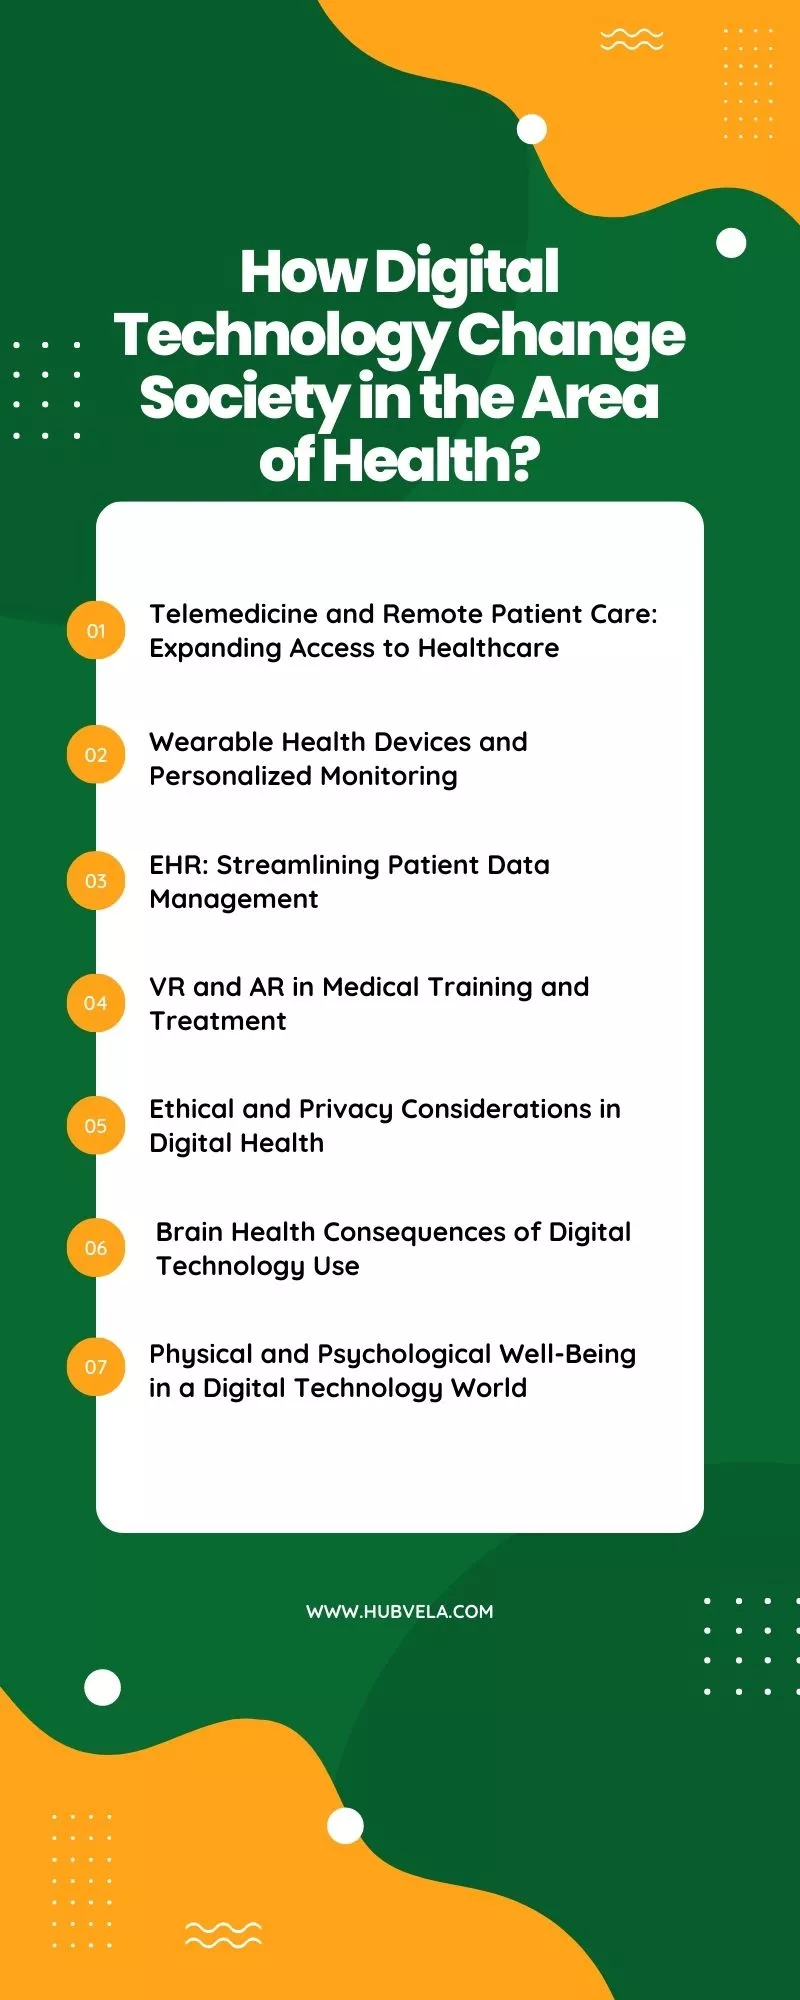 How Digital Technology Change Society in the Area of Health Infographic